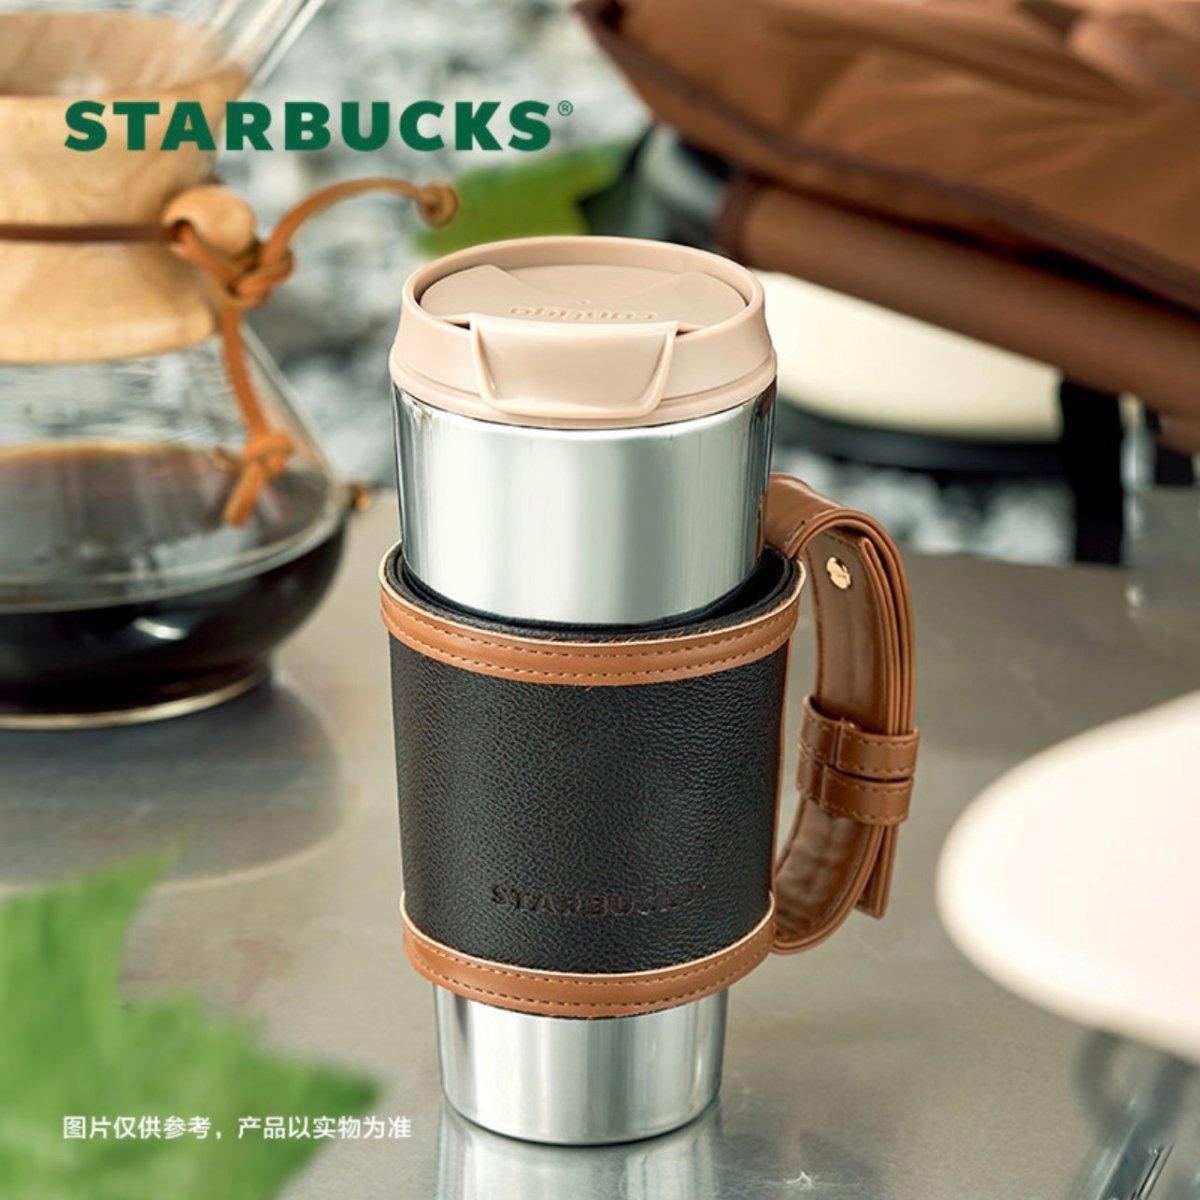 Starbucks 520ml/18oz Stainless Steel Travelling Cup with Leather Sleeve - Ann Ann Starbucks